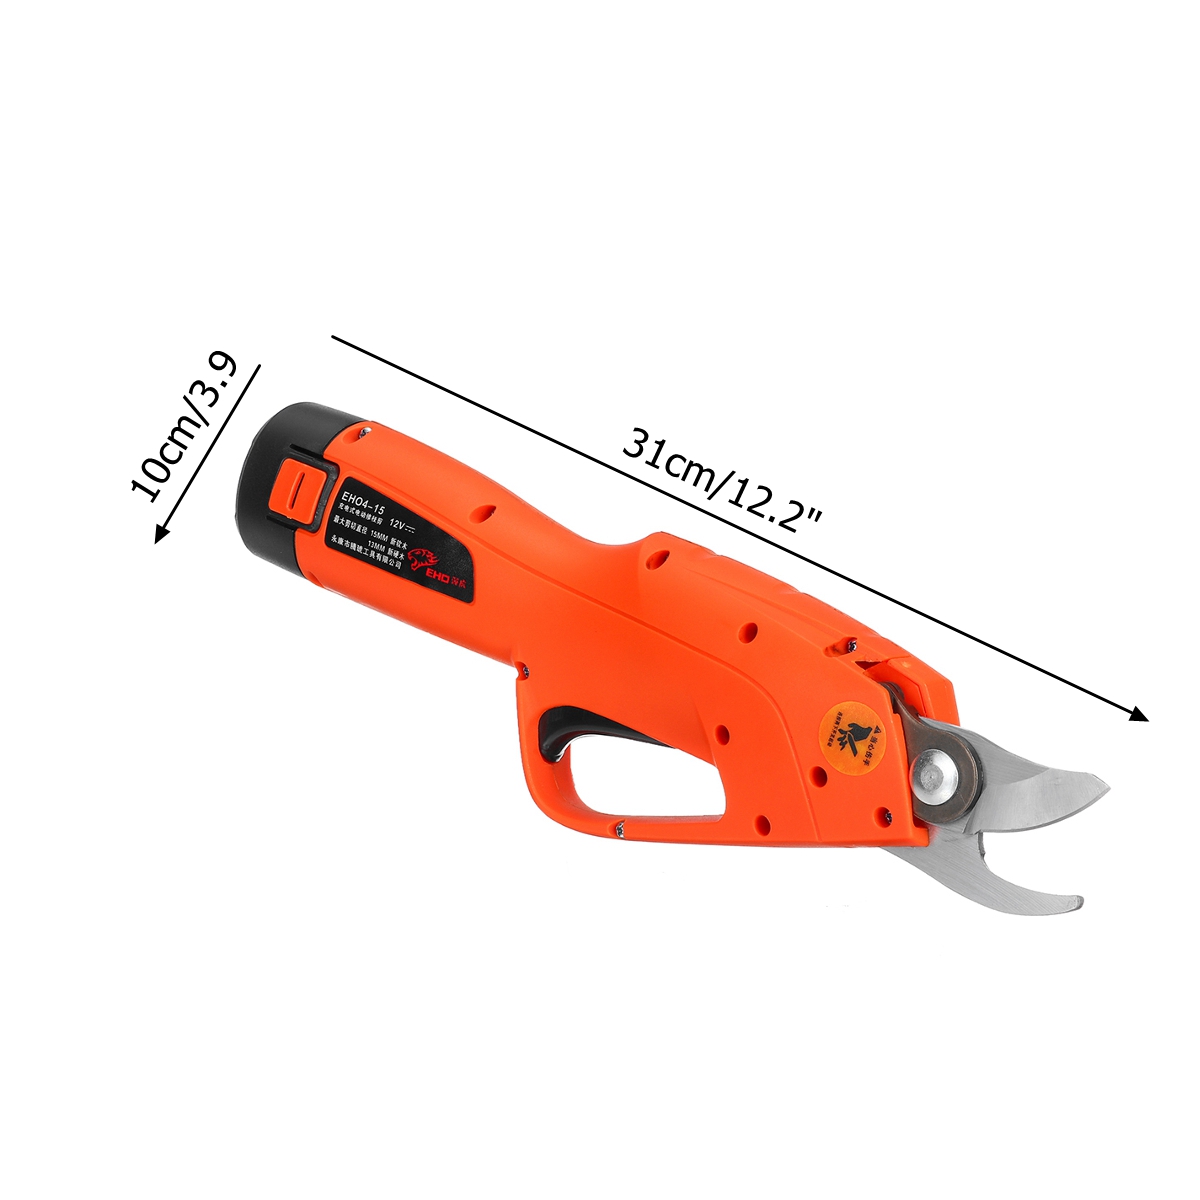 12V-Cordless-Rechargeable-Power-Pruner-Tree-Trimmers-Secateurs-Cutting-Scissors-Electric-Pruning-Bra-1559733-5